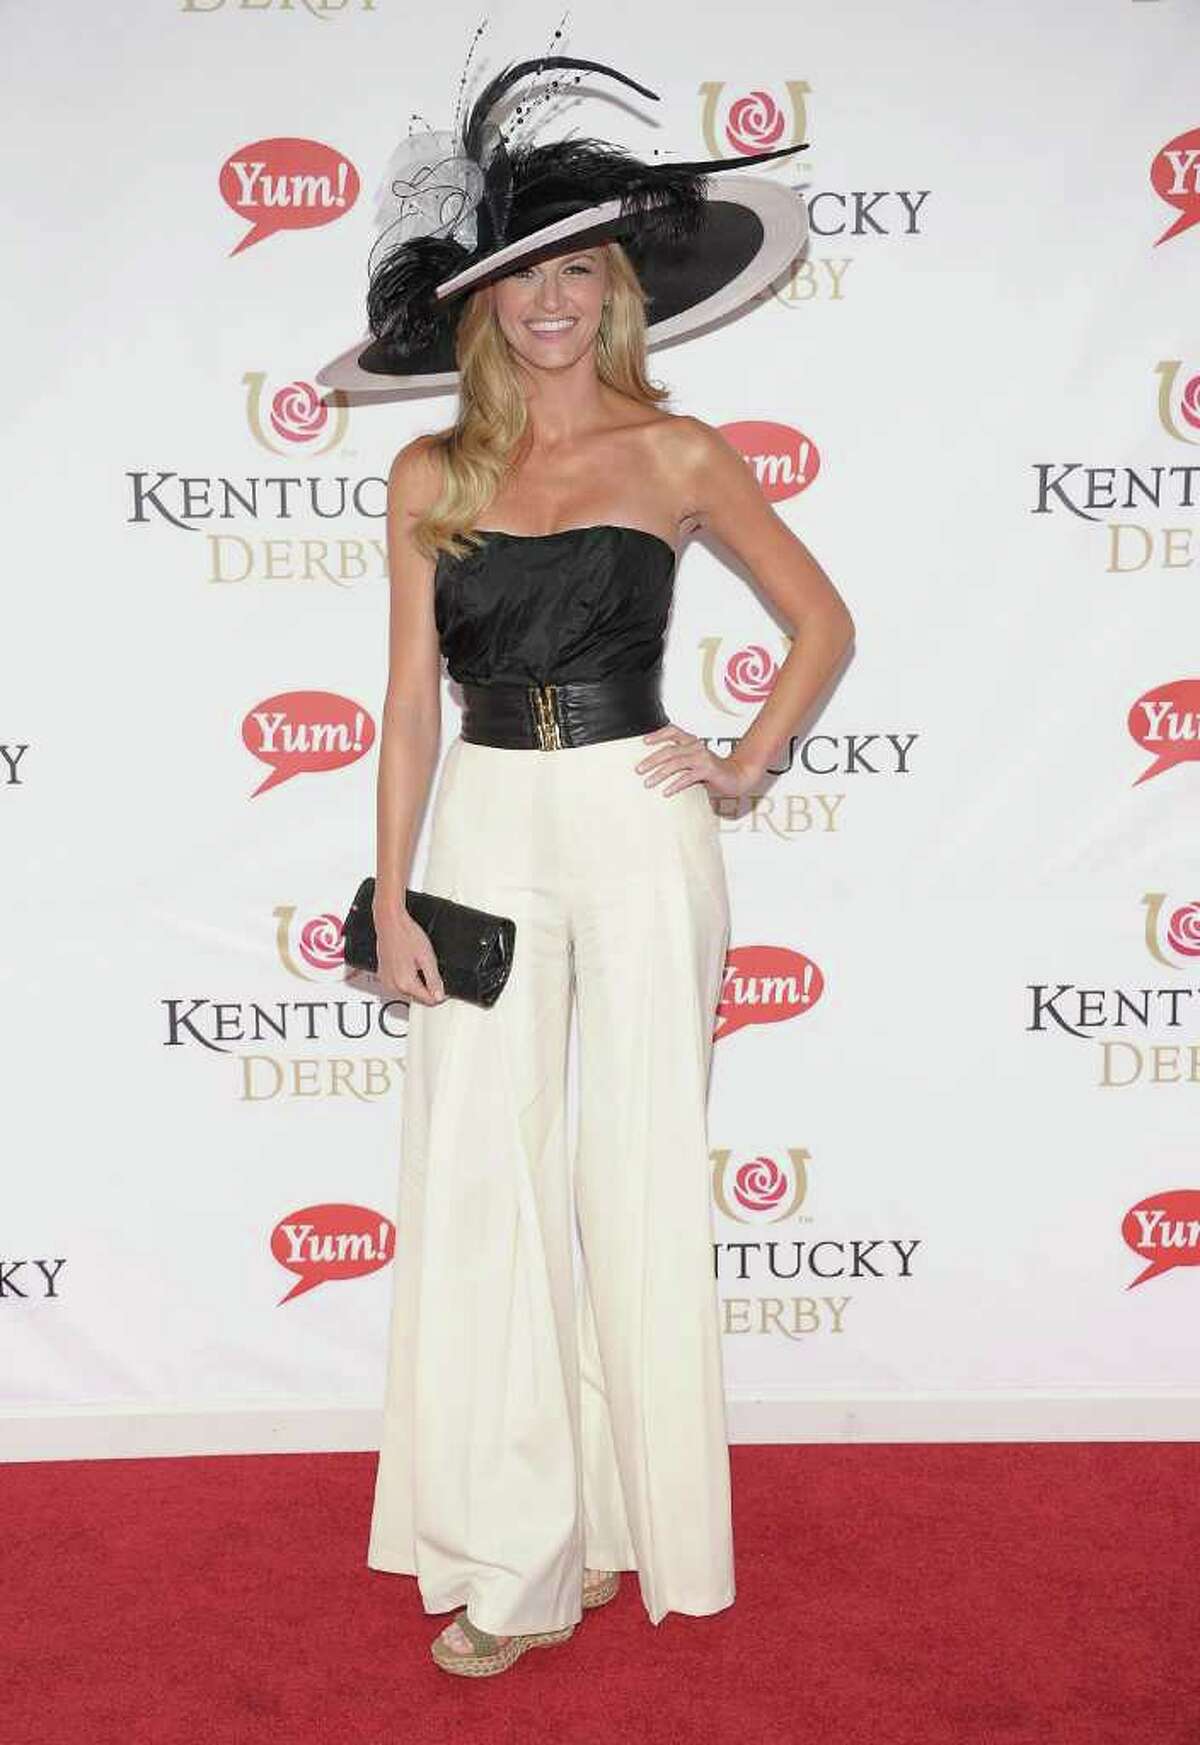 LOUISVILLE, KY - MAY 07: Sportscaster Erin Andrews attends the 137th Kentucky Derby at Churchill Downs on May 7, 2011 in Louisville, Kentucky. (Photo by Michael Loccisano/Getty Images) *** Local Caption *** Erin Andrews;